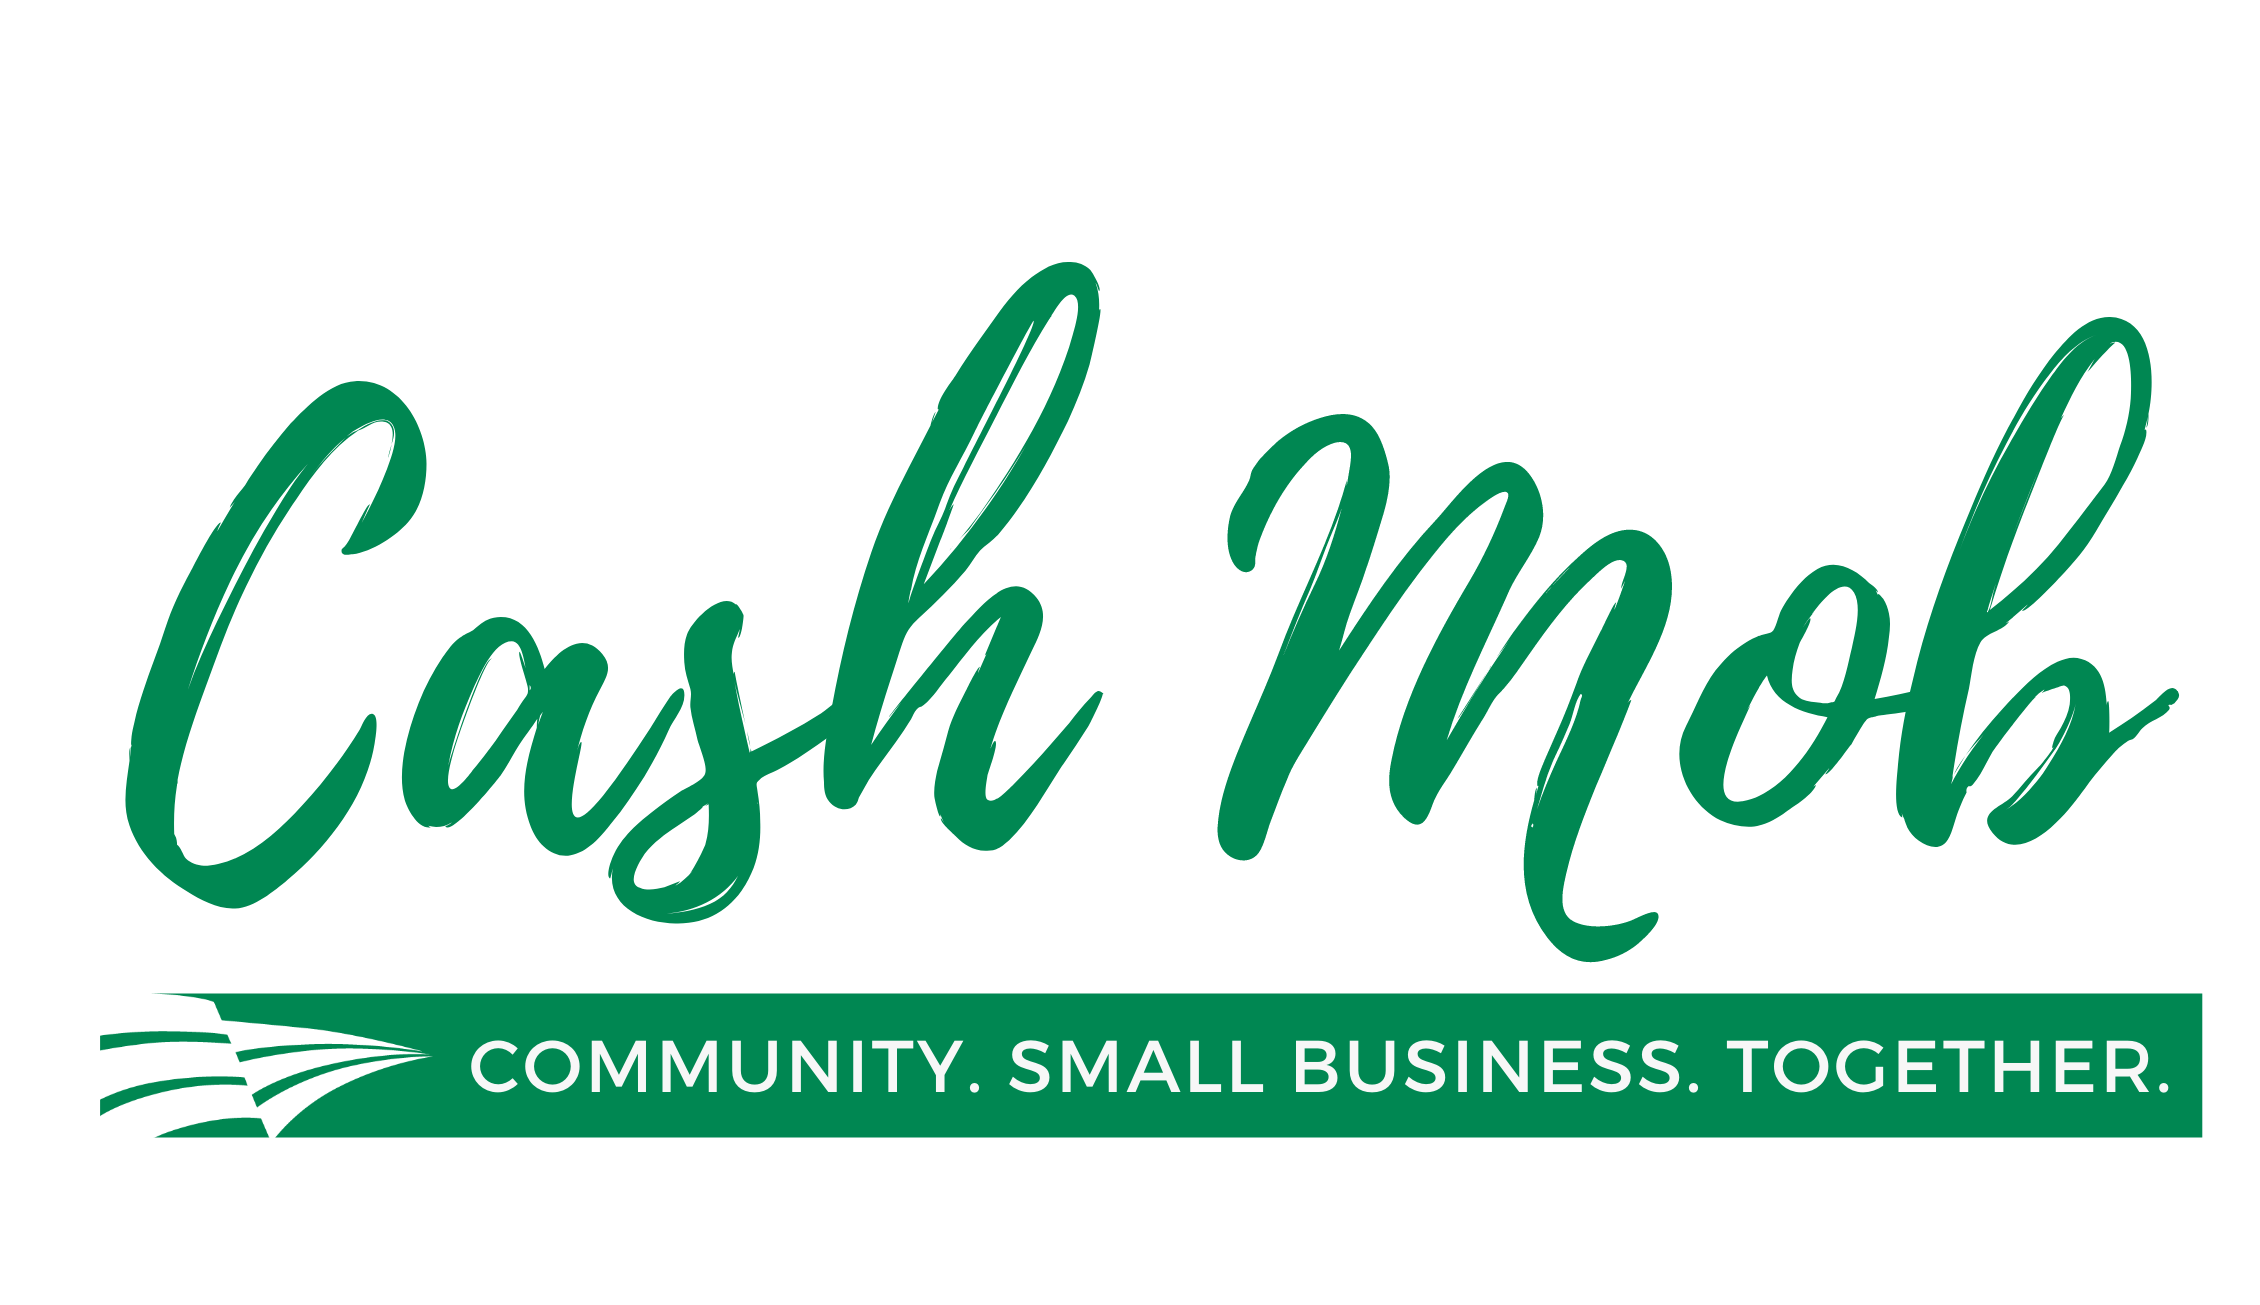 Cash Mob, Community, Small Business, Together text